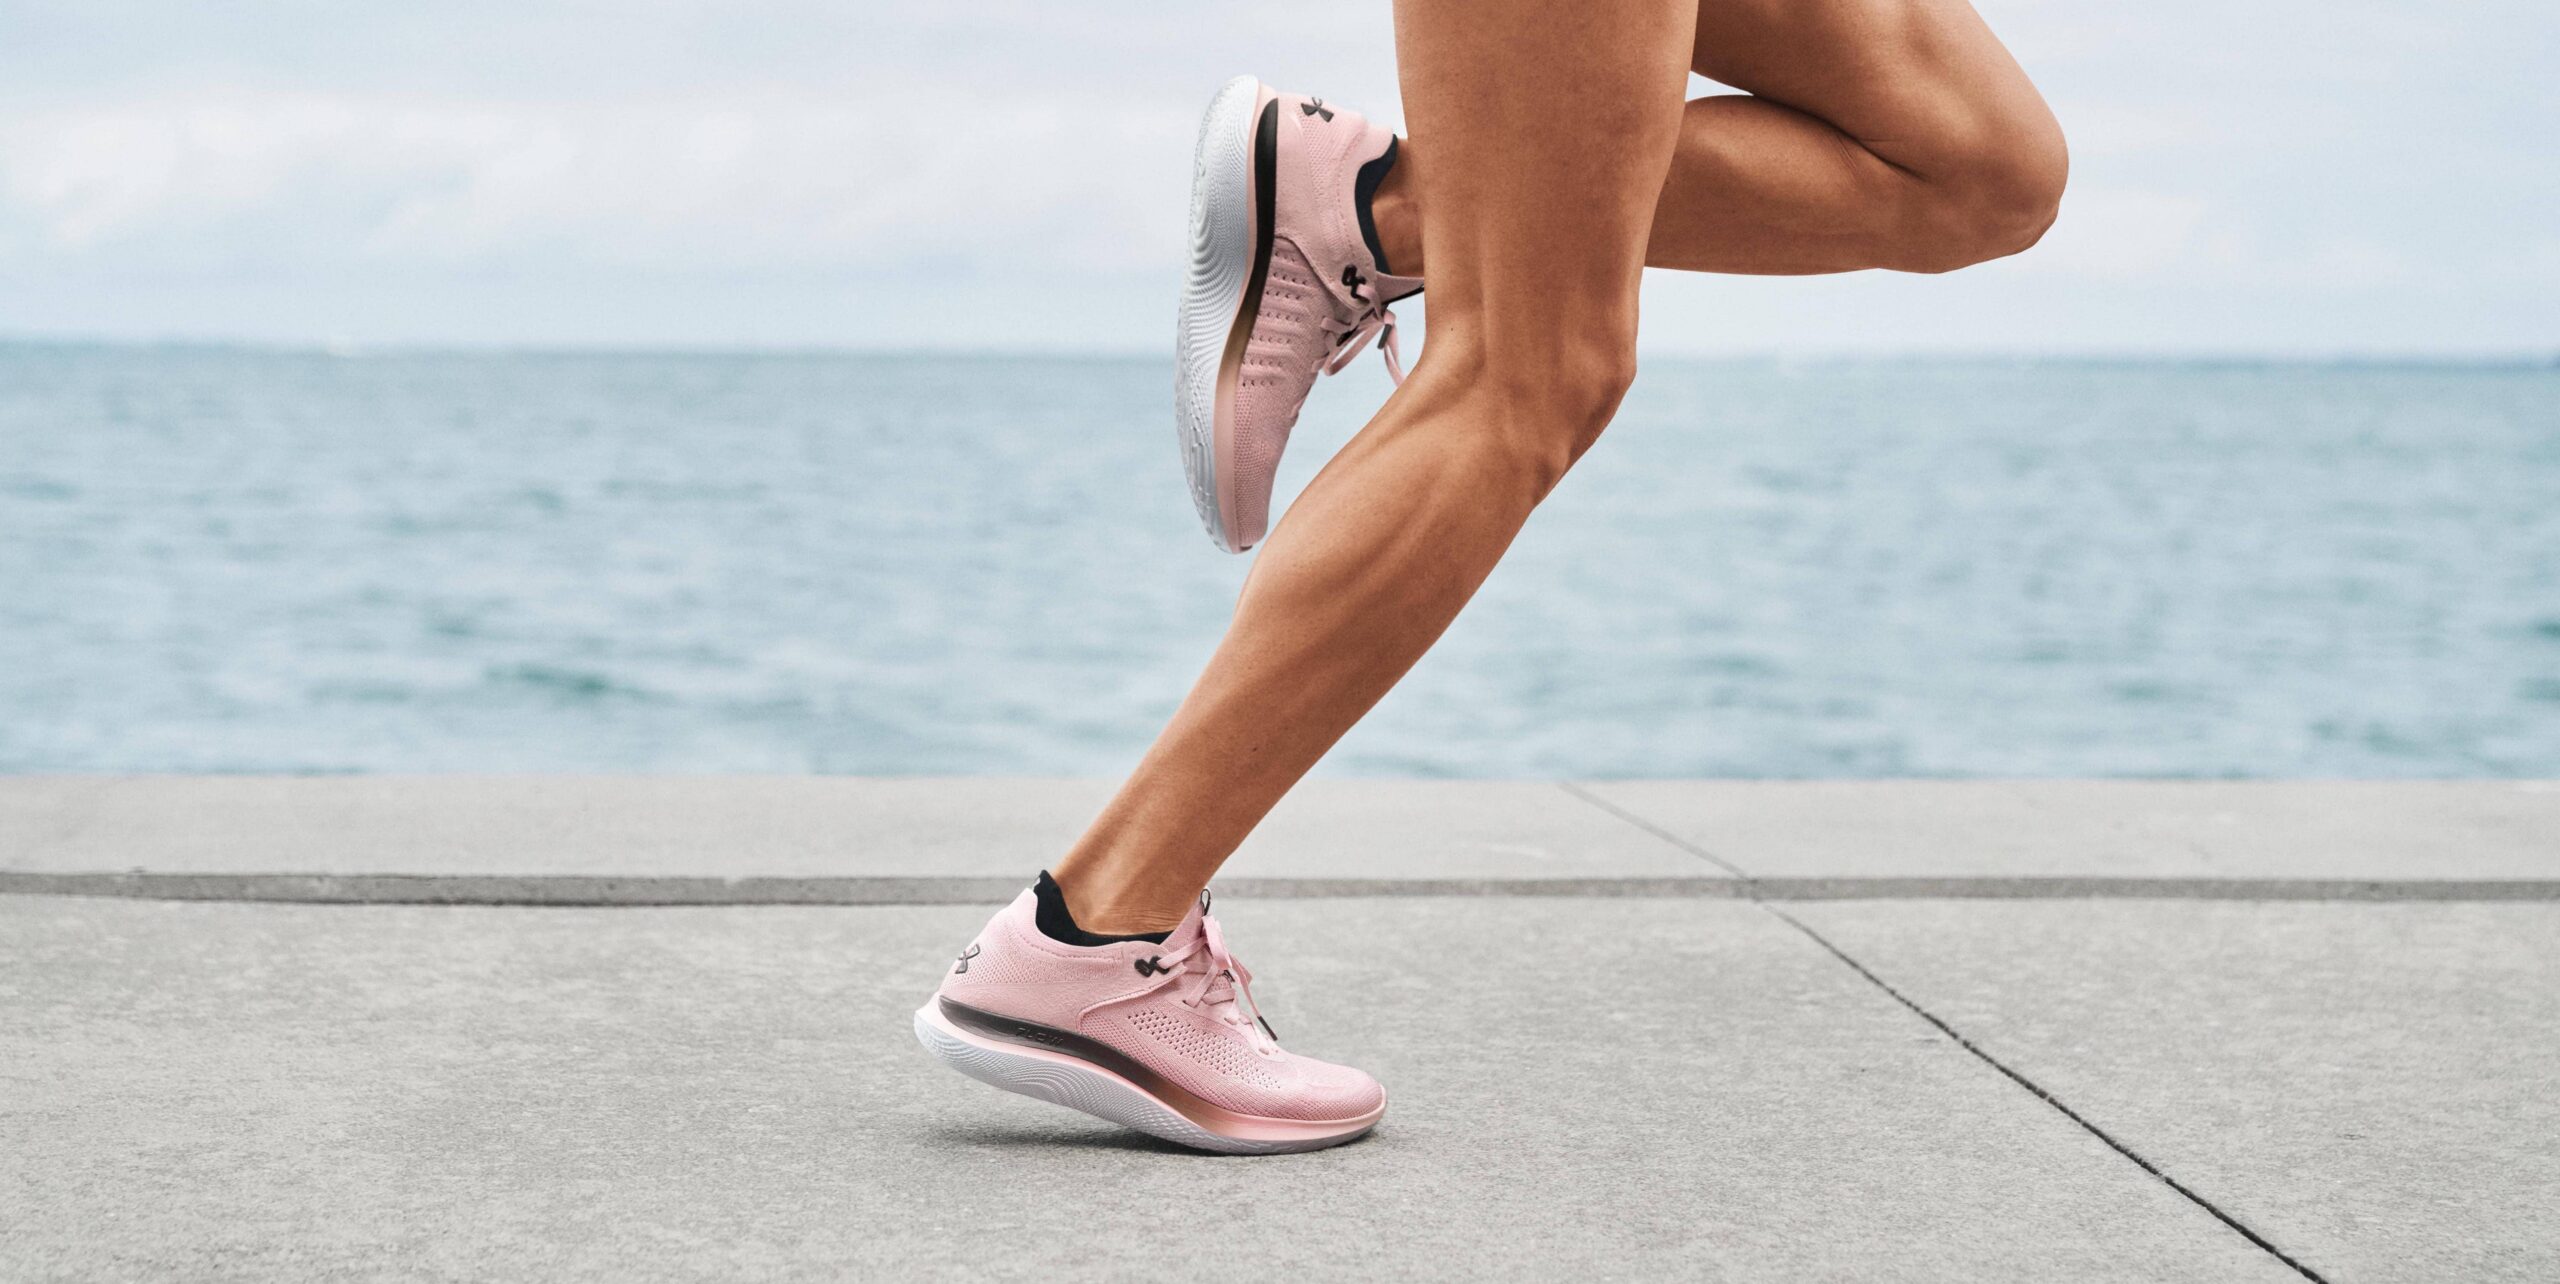 Under Armour Launches Its First Running Shoe Made On A Women’s Last